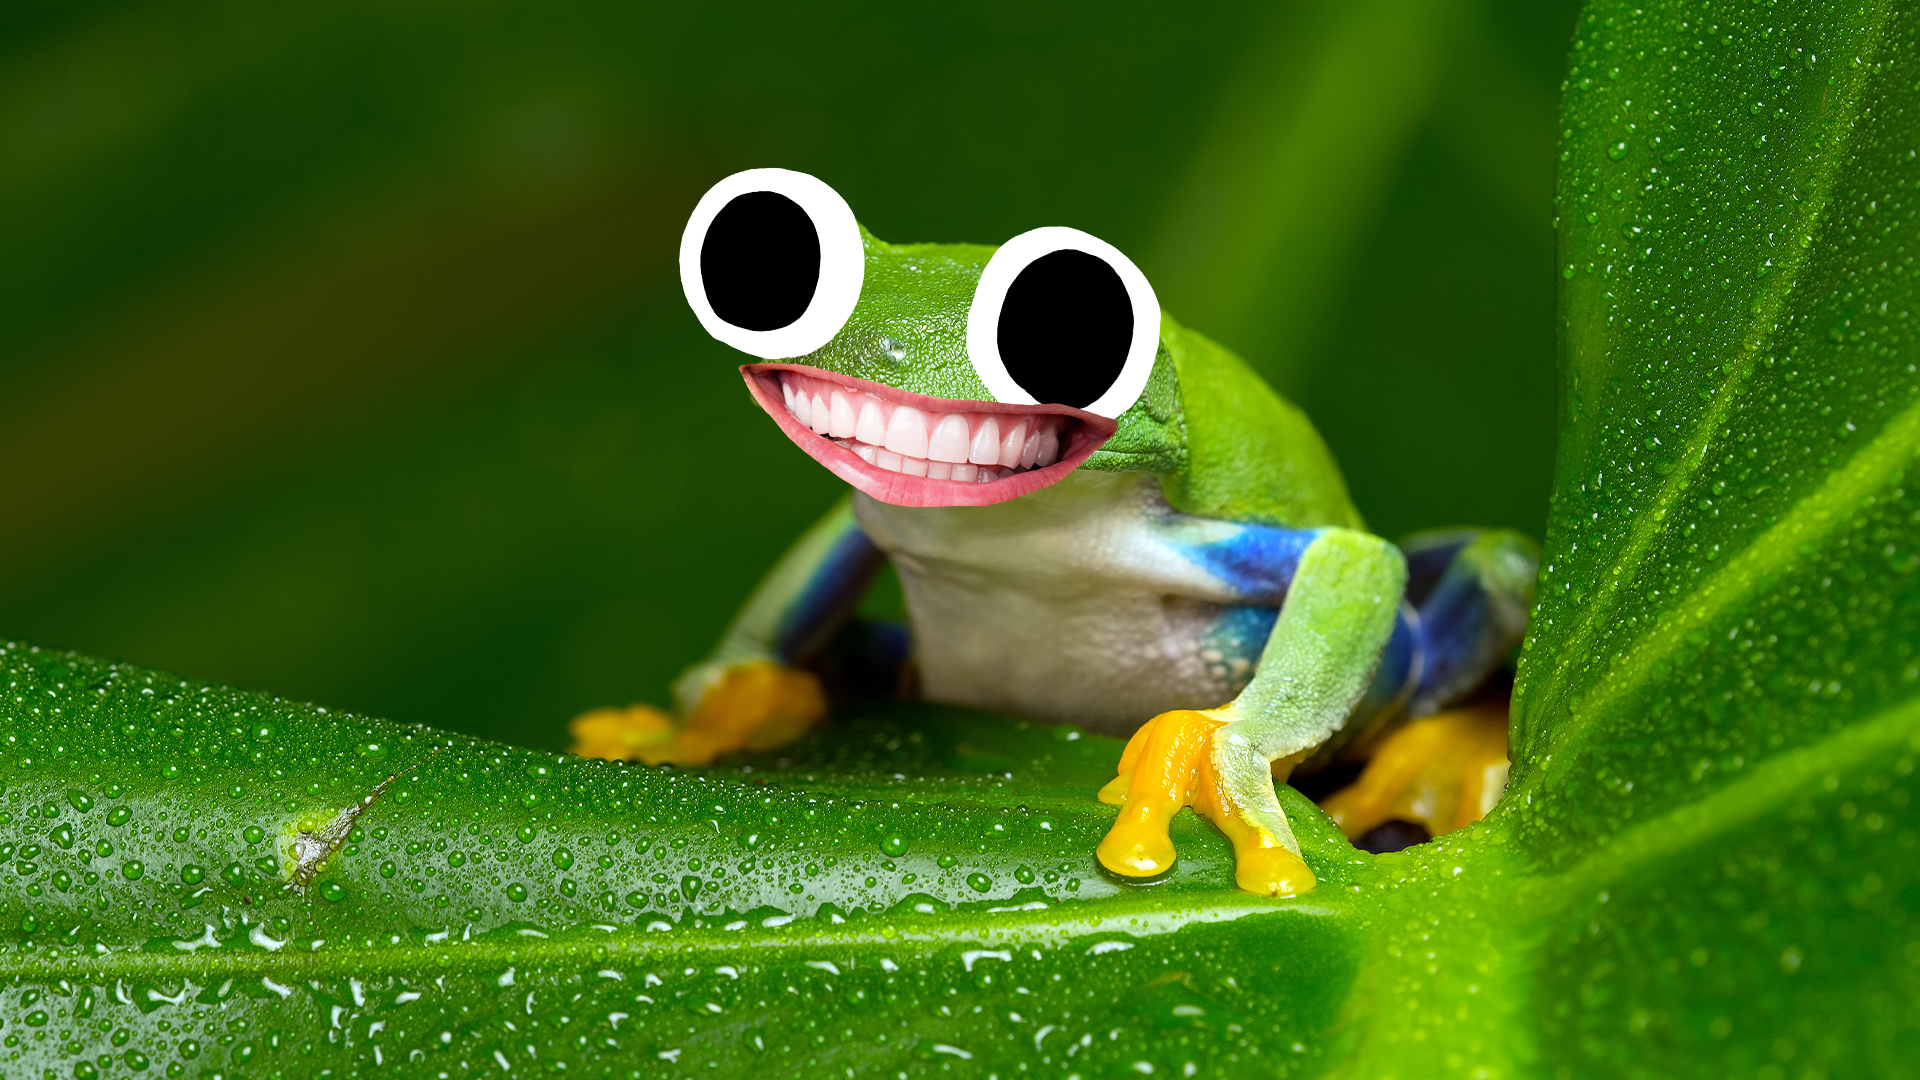 A silly frog